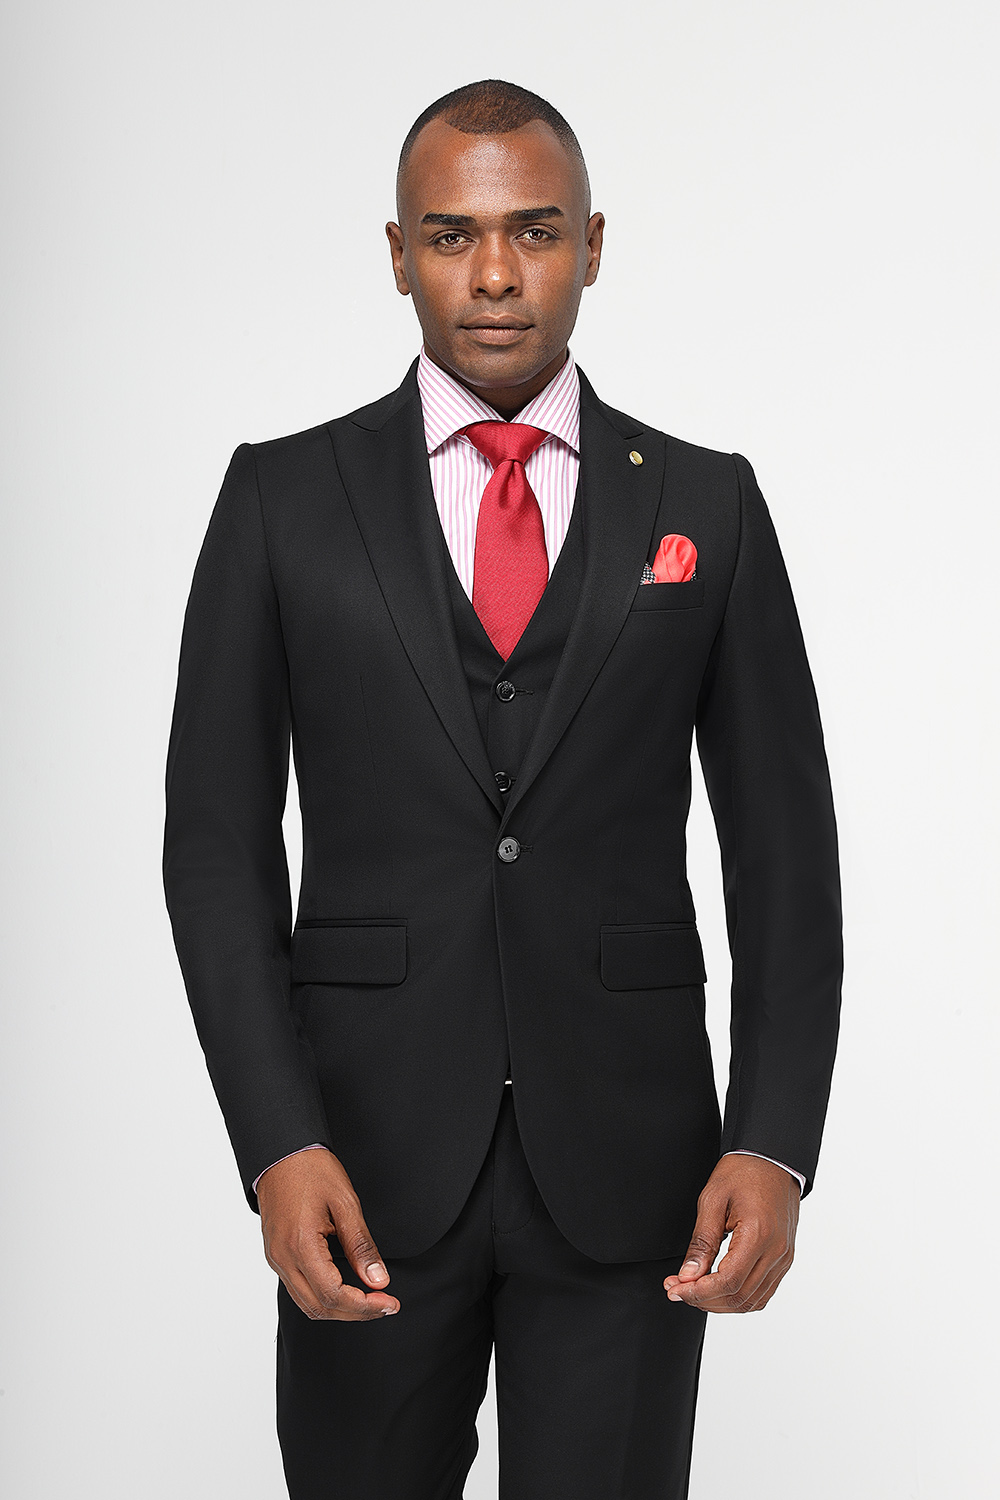 Sophisticated | Black suit red tie, Mens fashion suits, Mens outfits